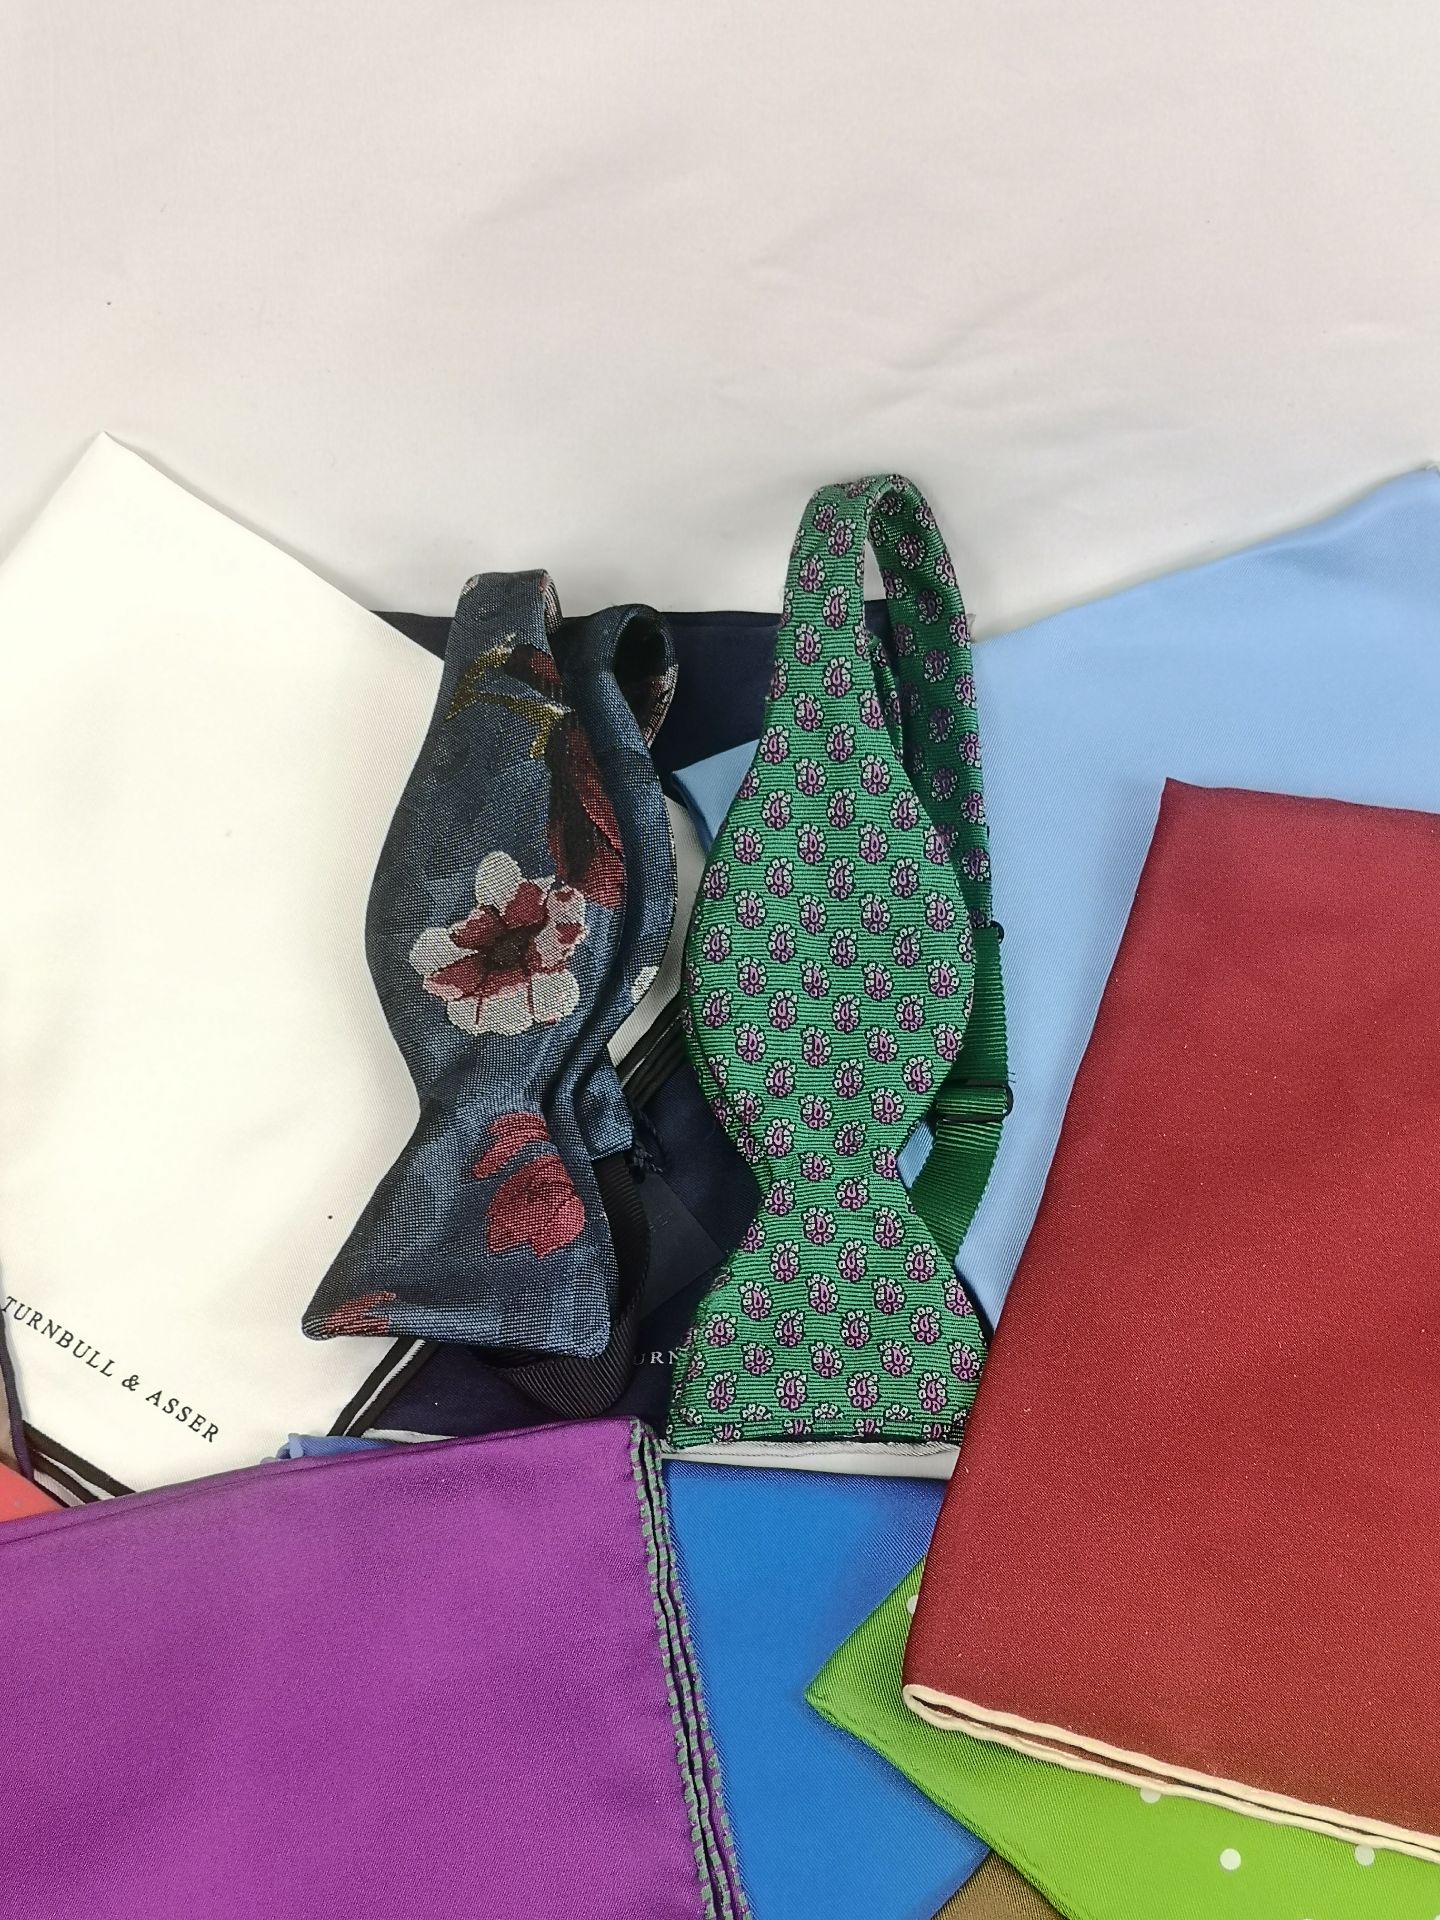 Ten Turnbull & Asser pocket squares together with two Turnbull & Asser bow ties. - Image 3 of 6